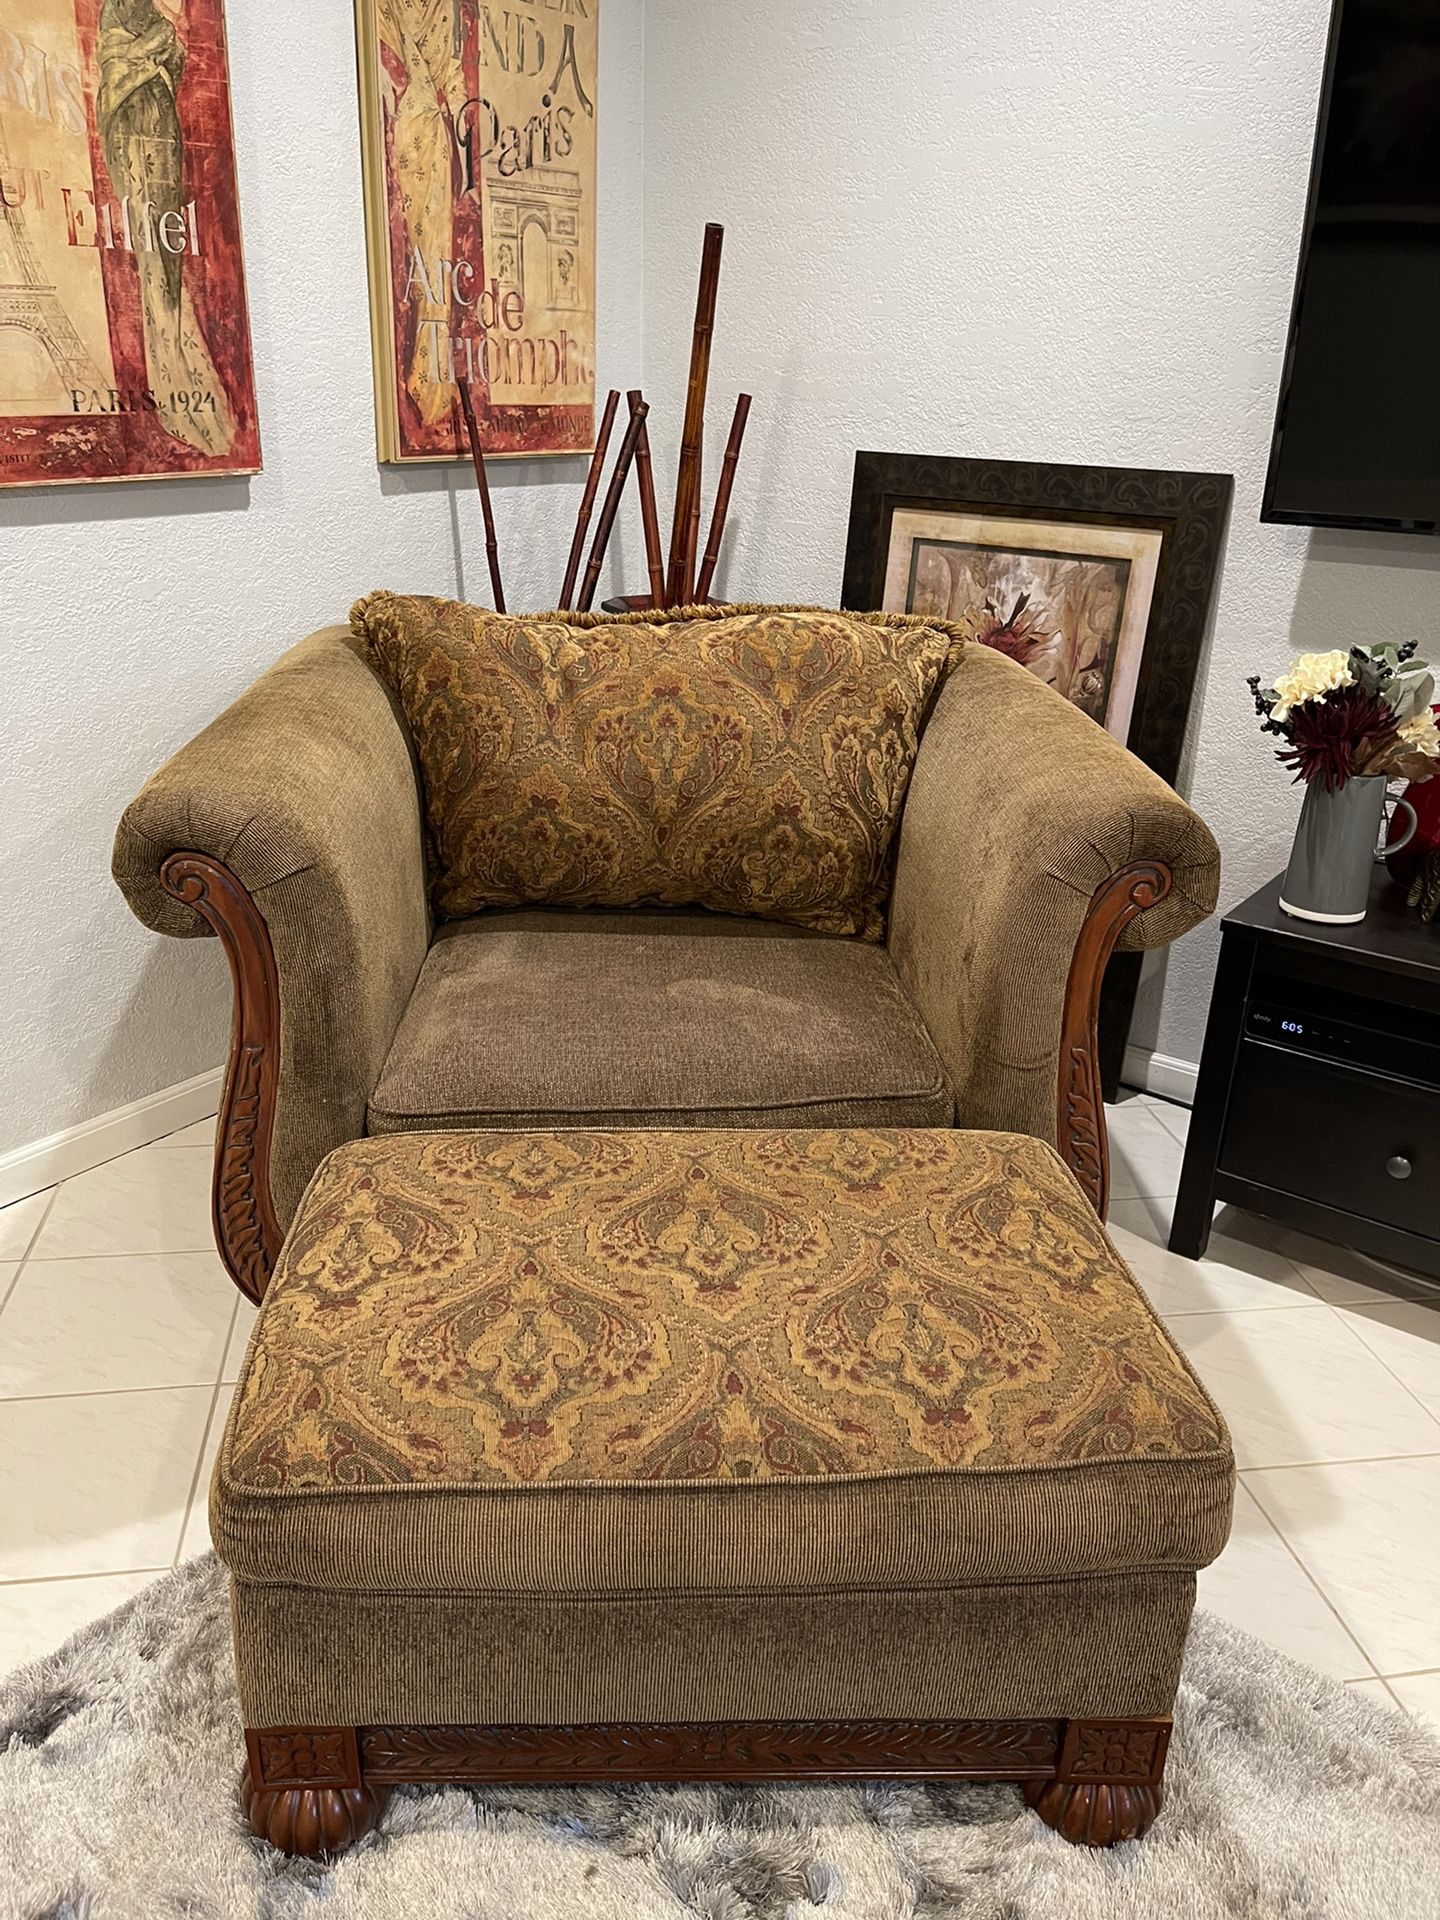 Large Living Room Chair and Ottoman